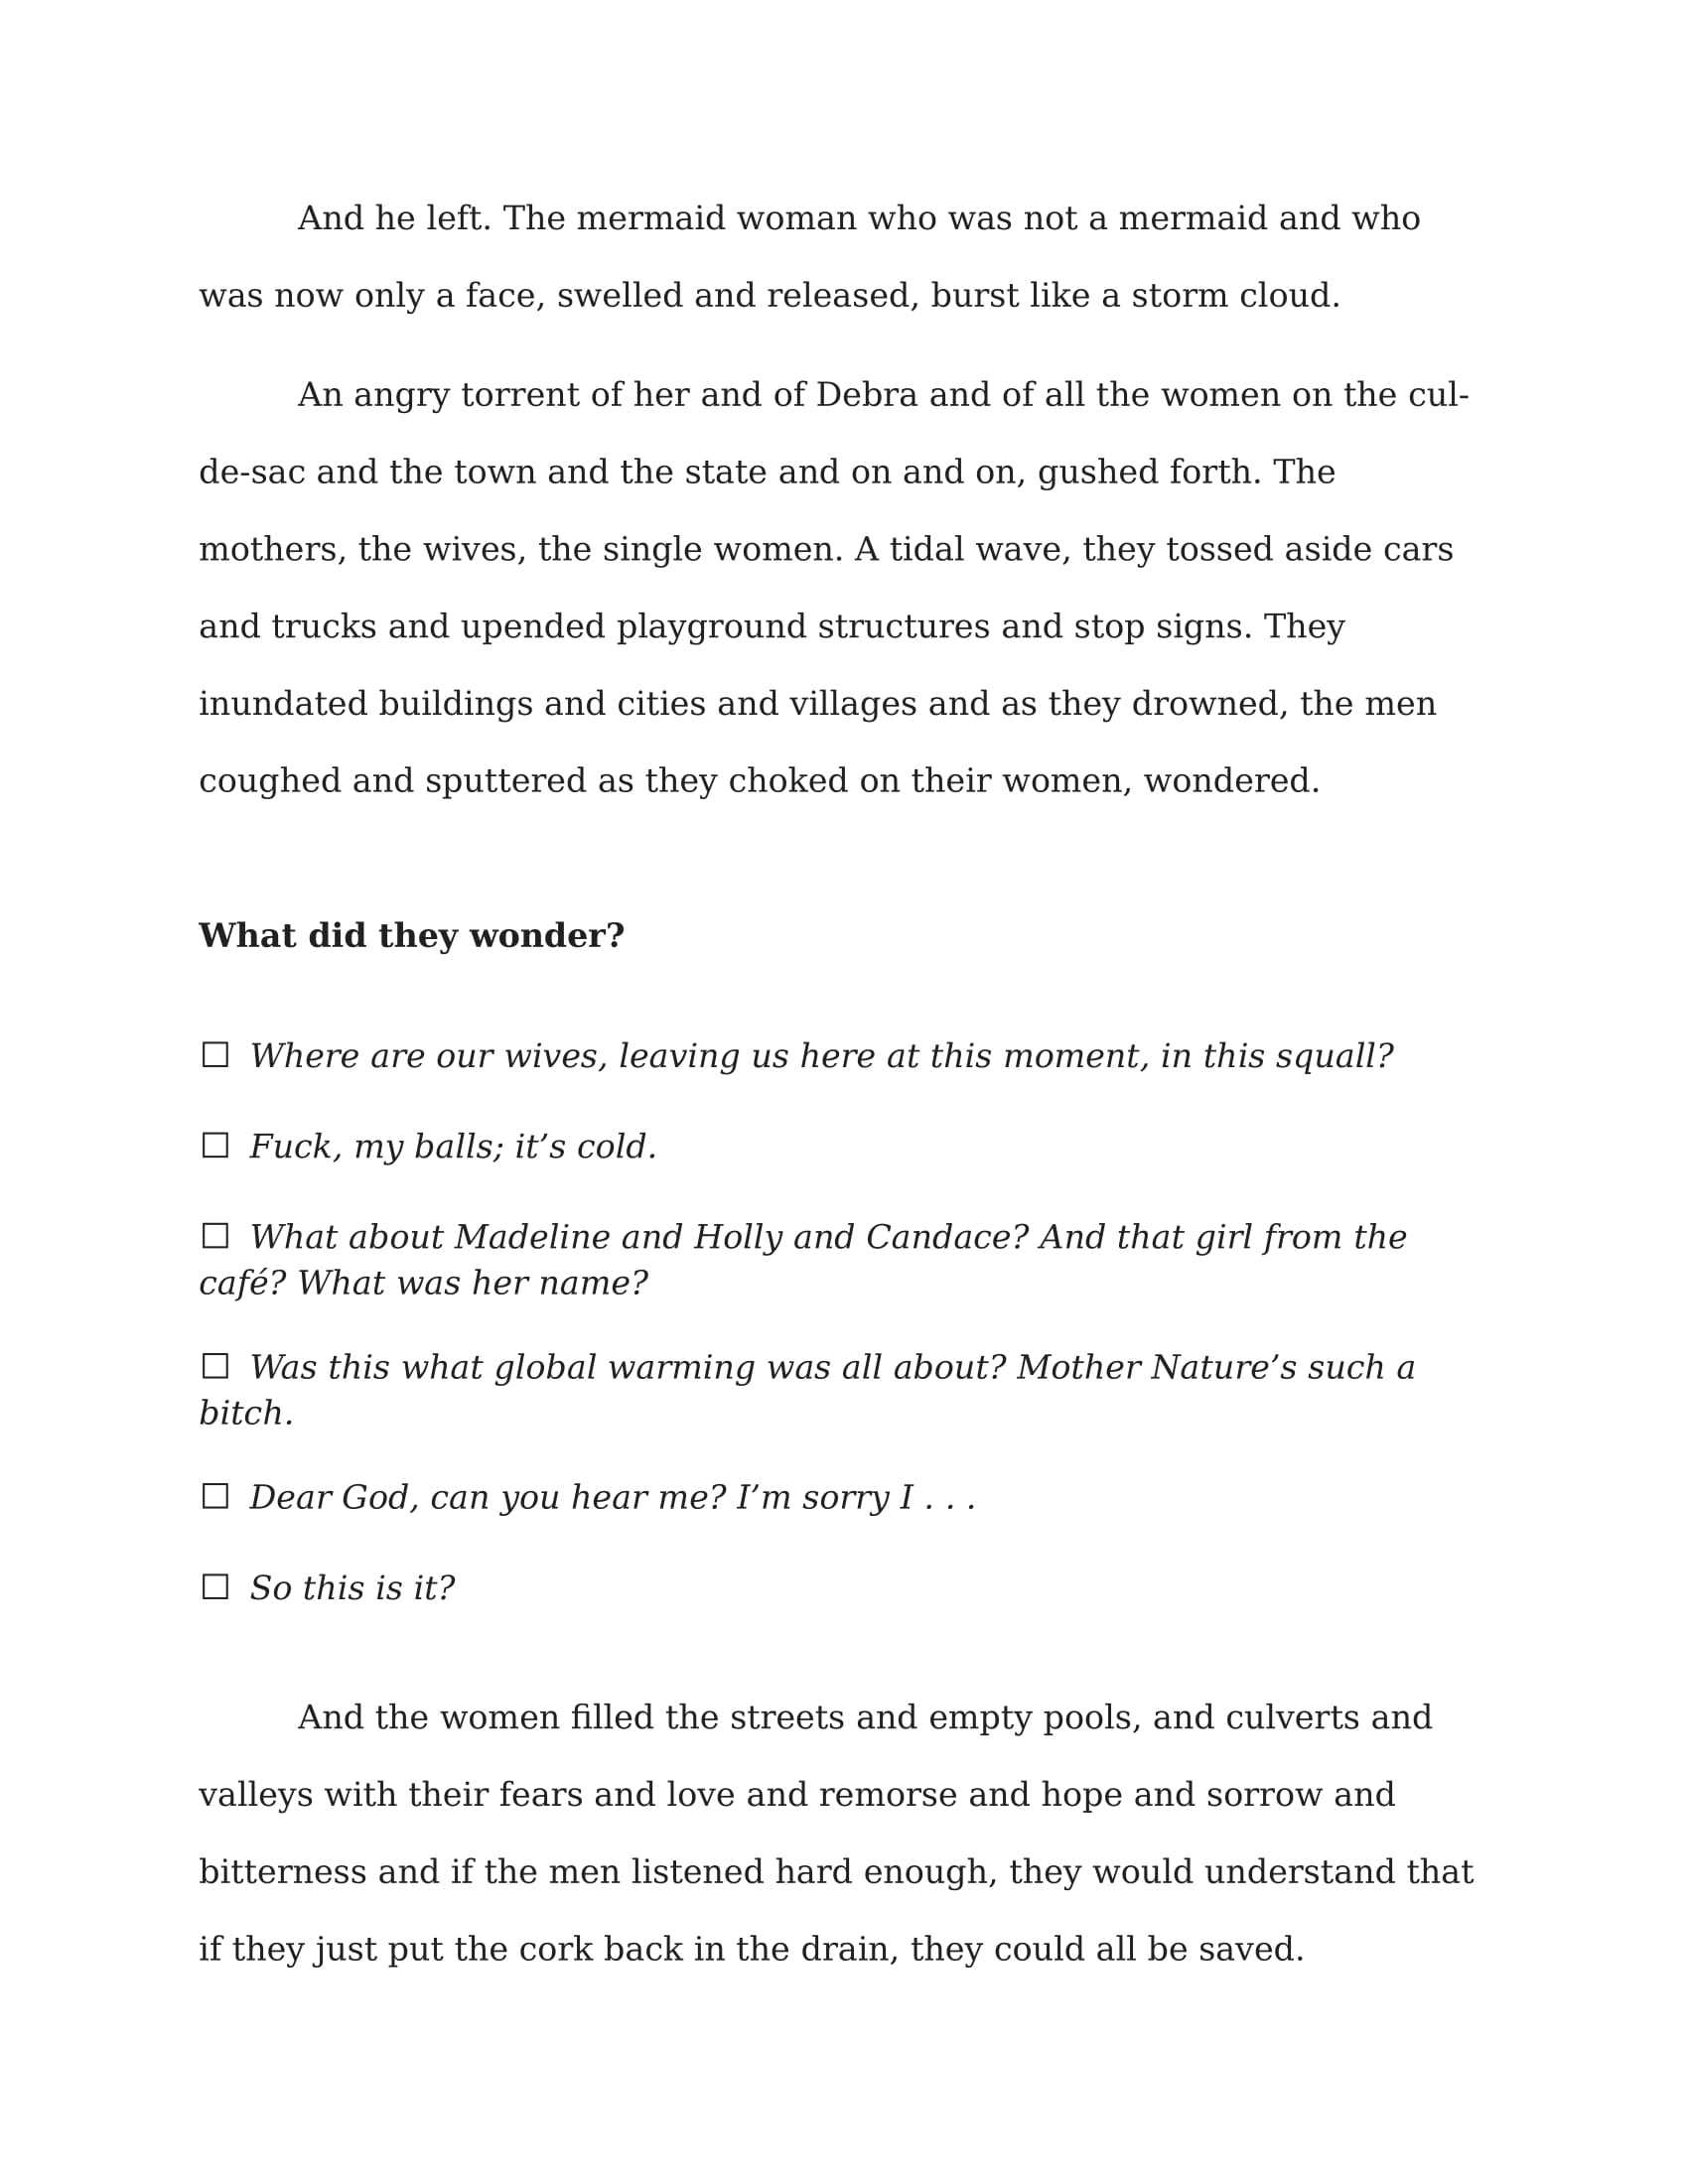 Tree Ring Activity Worksheet Answers with Fiction Archives Page 2 Of 4 [pank]